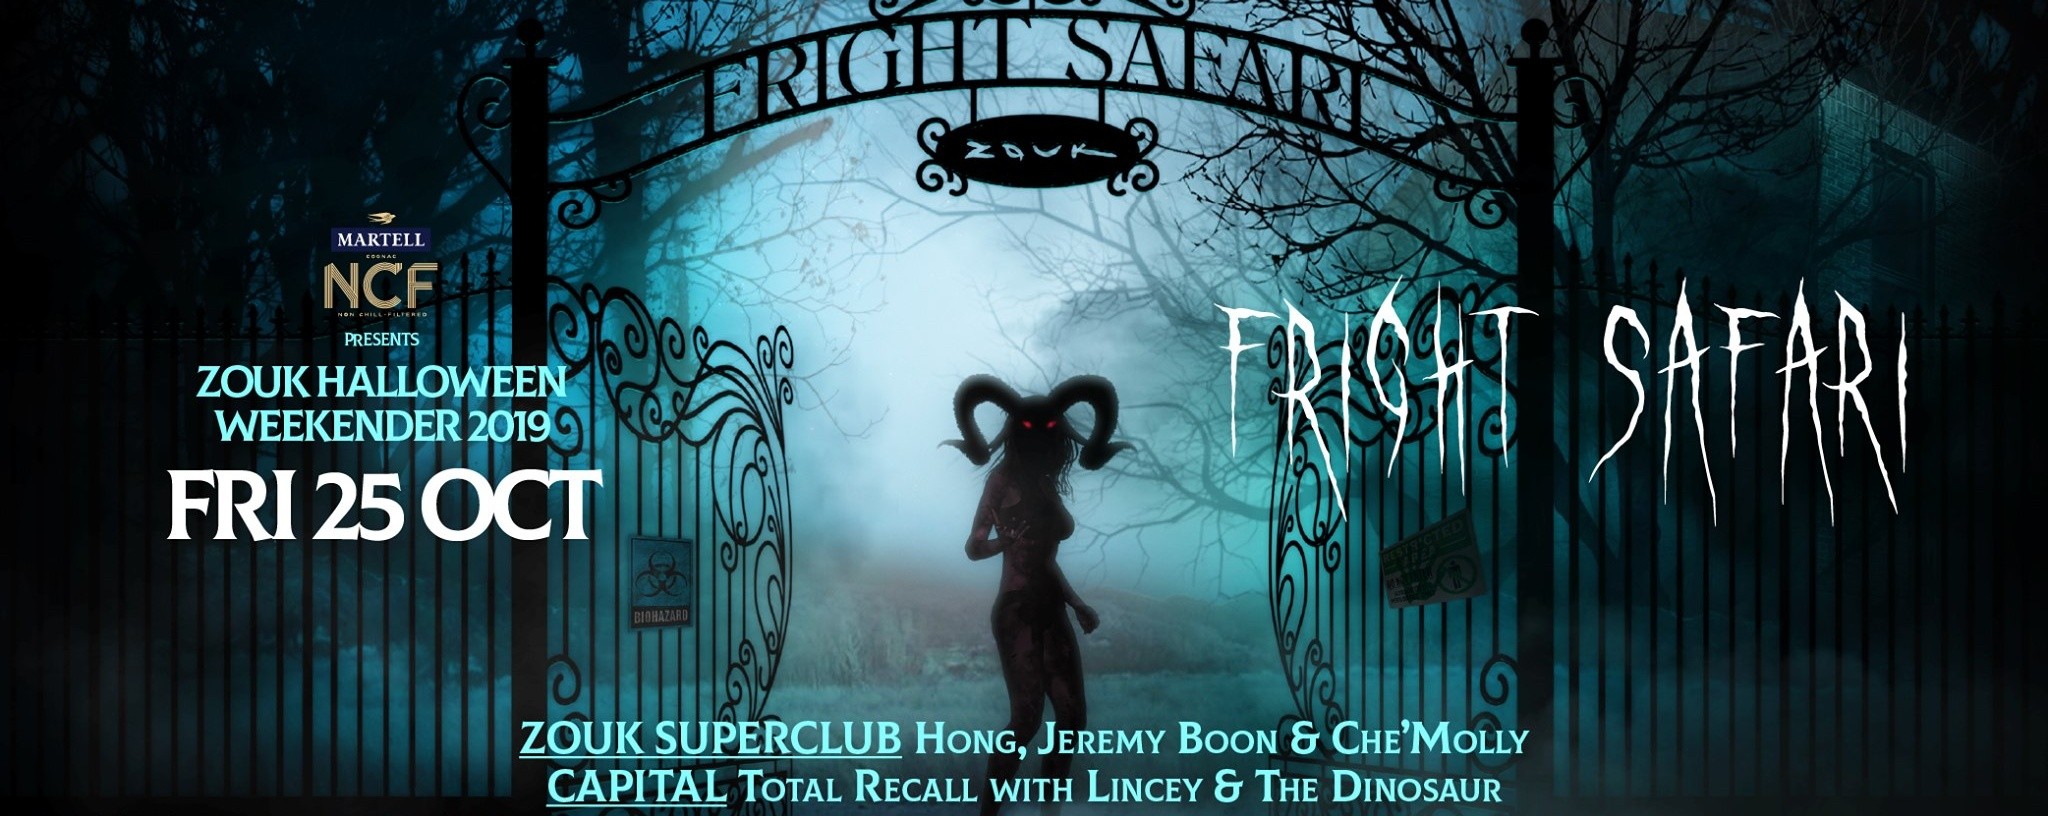 MARTELL NCF PRESENTS FRIGHT SAFARI FT. TOTAL RECALL WITH LINCEY & THE DINOSAUR